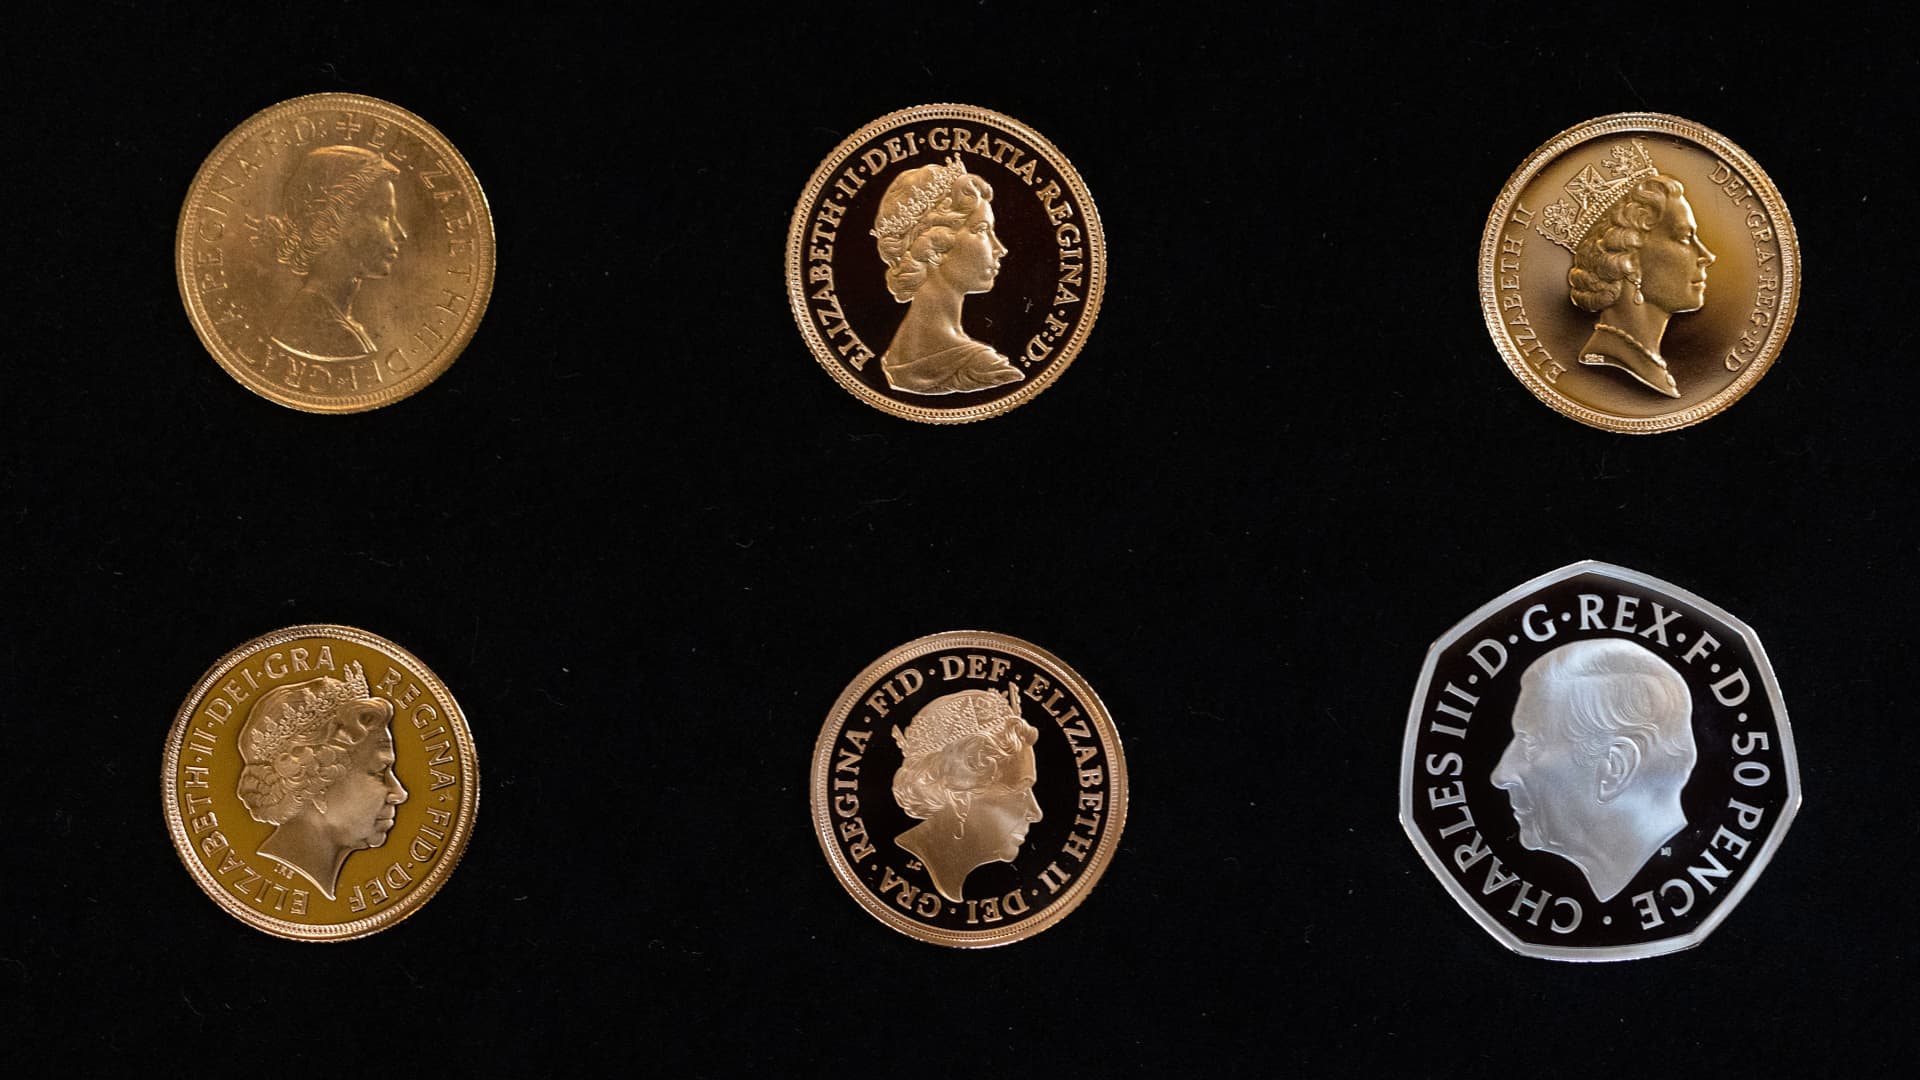 A display of coins showing the five versions of Queen Elizabeth II's head used over her lifetime, and the new King Charles III's head on a new 50 pence coin